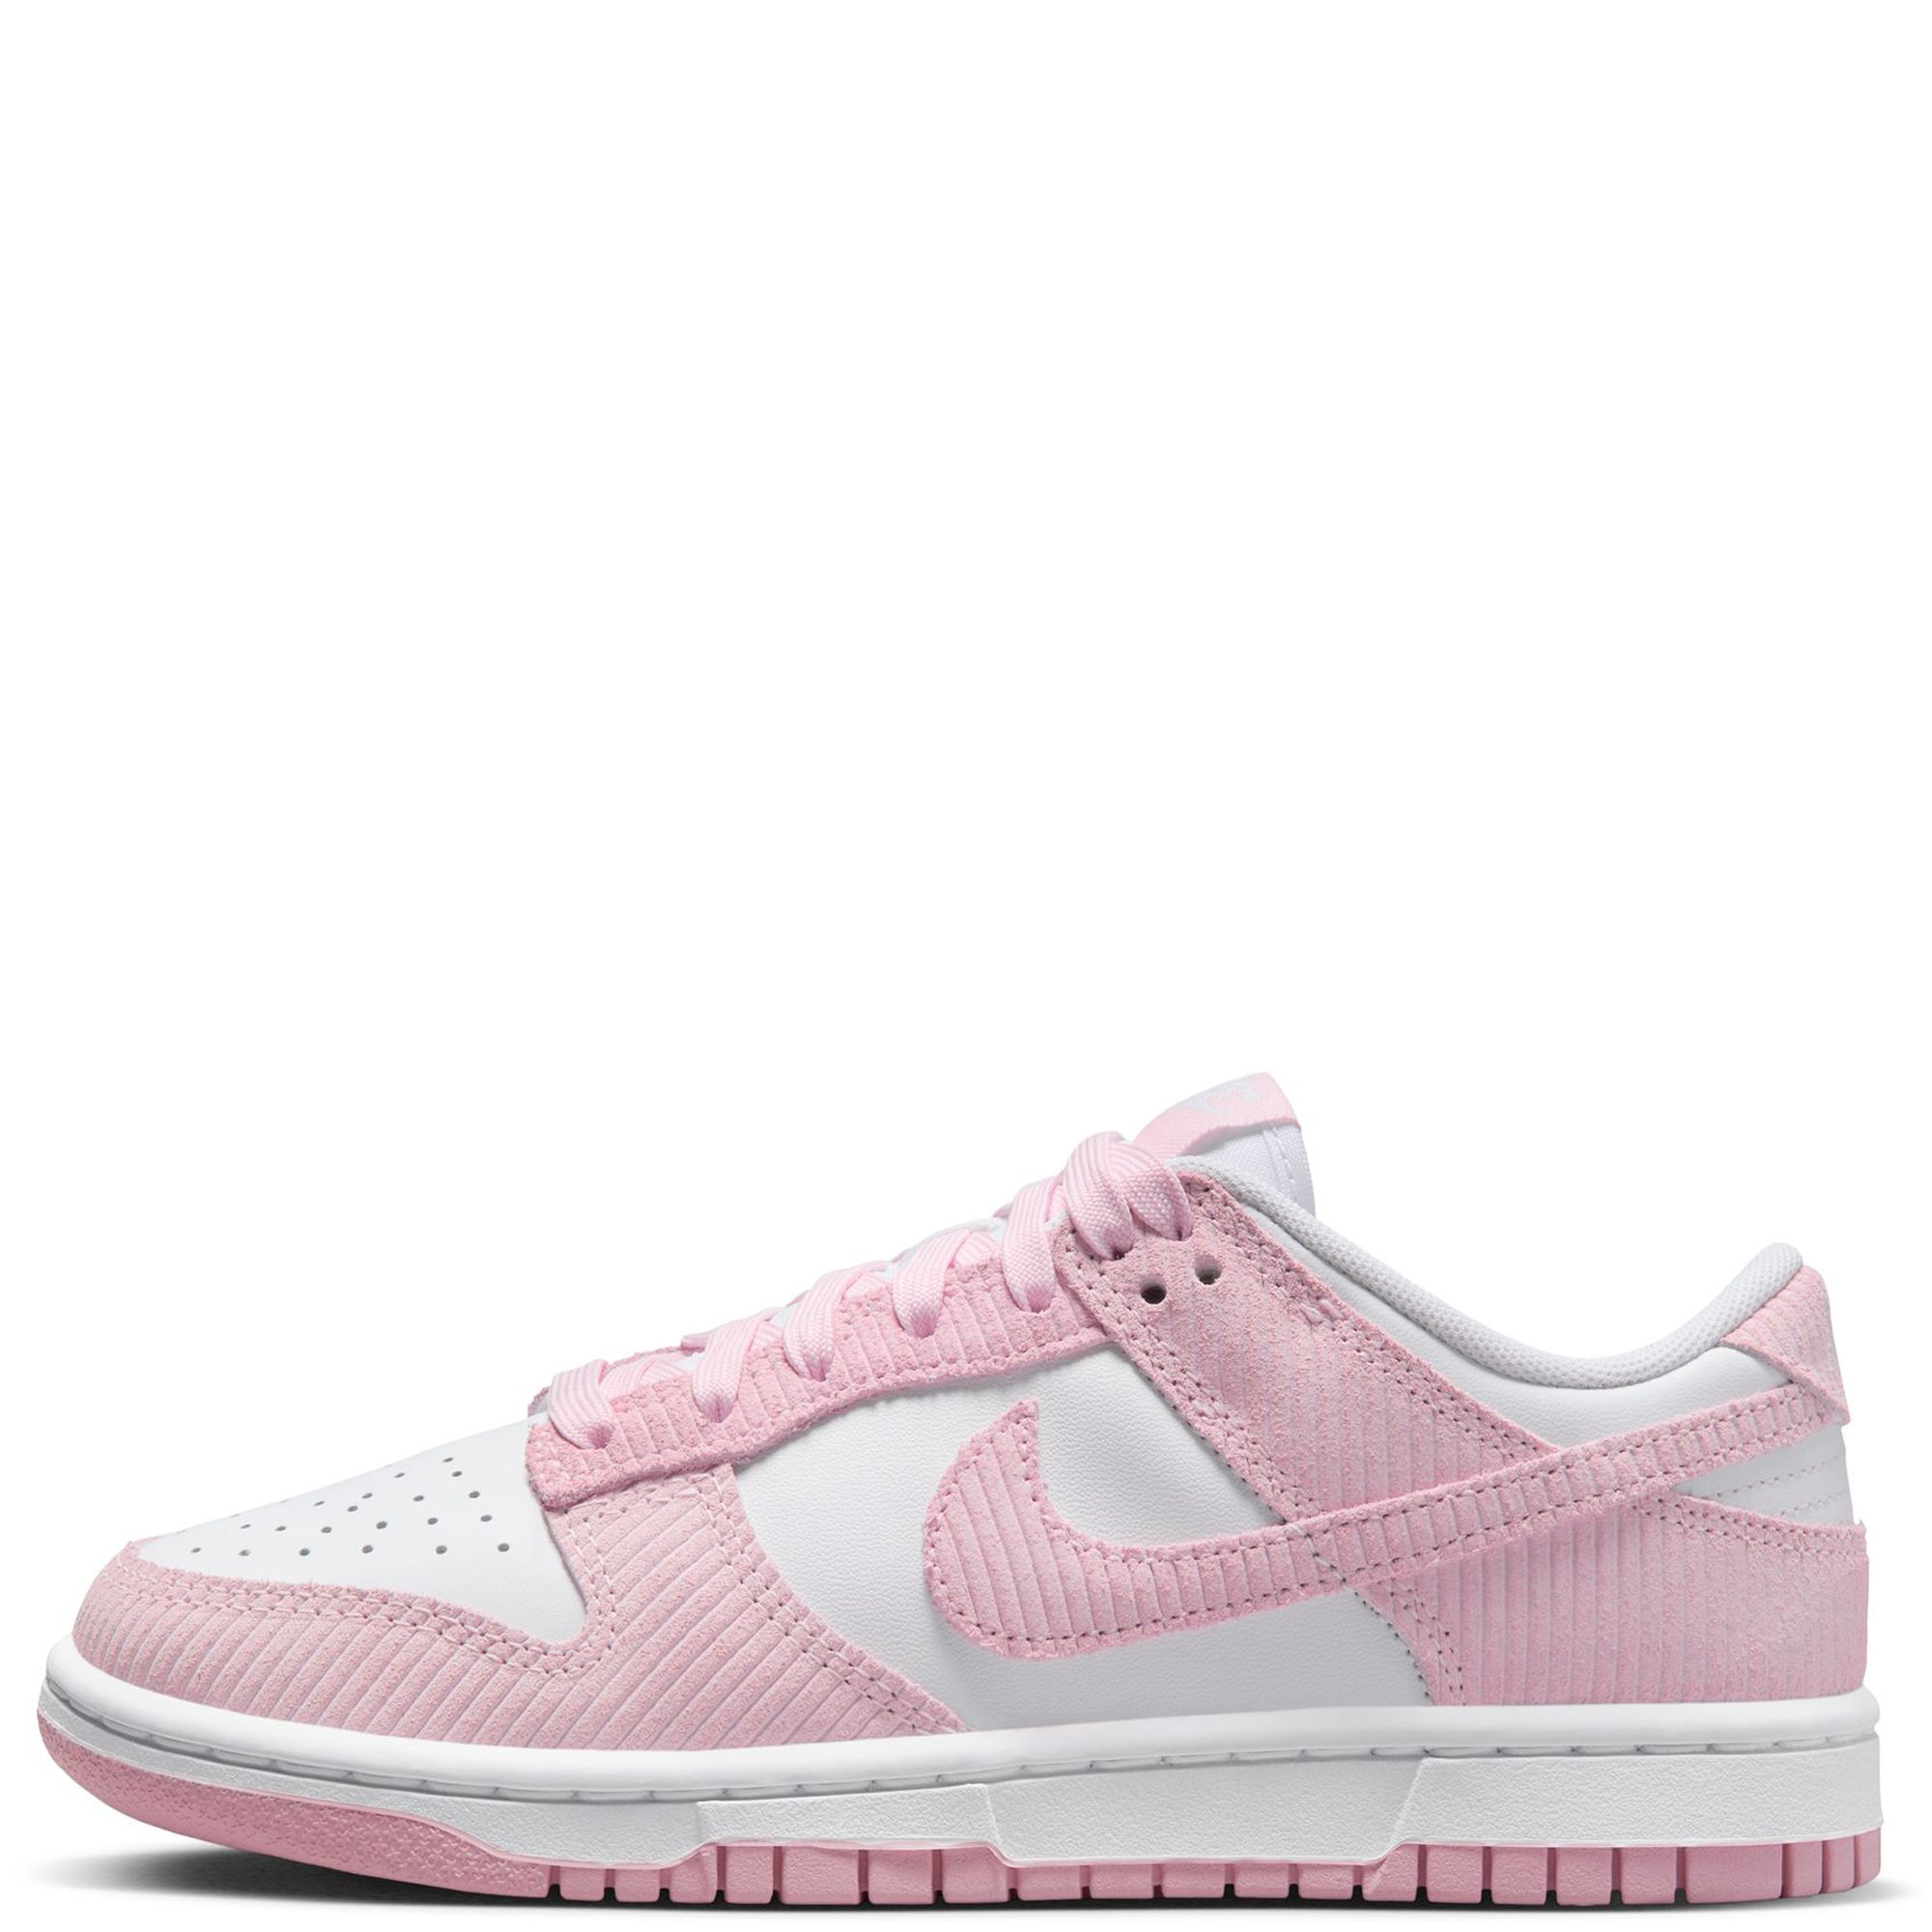 The Nike SB Dunk Low Gets Dressed in Bubblegum Pink  Sneakers shoes  outfit, Pink shoes outfit, Pink sneakers